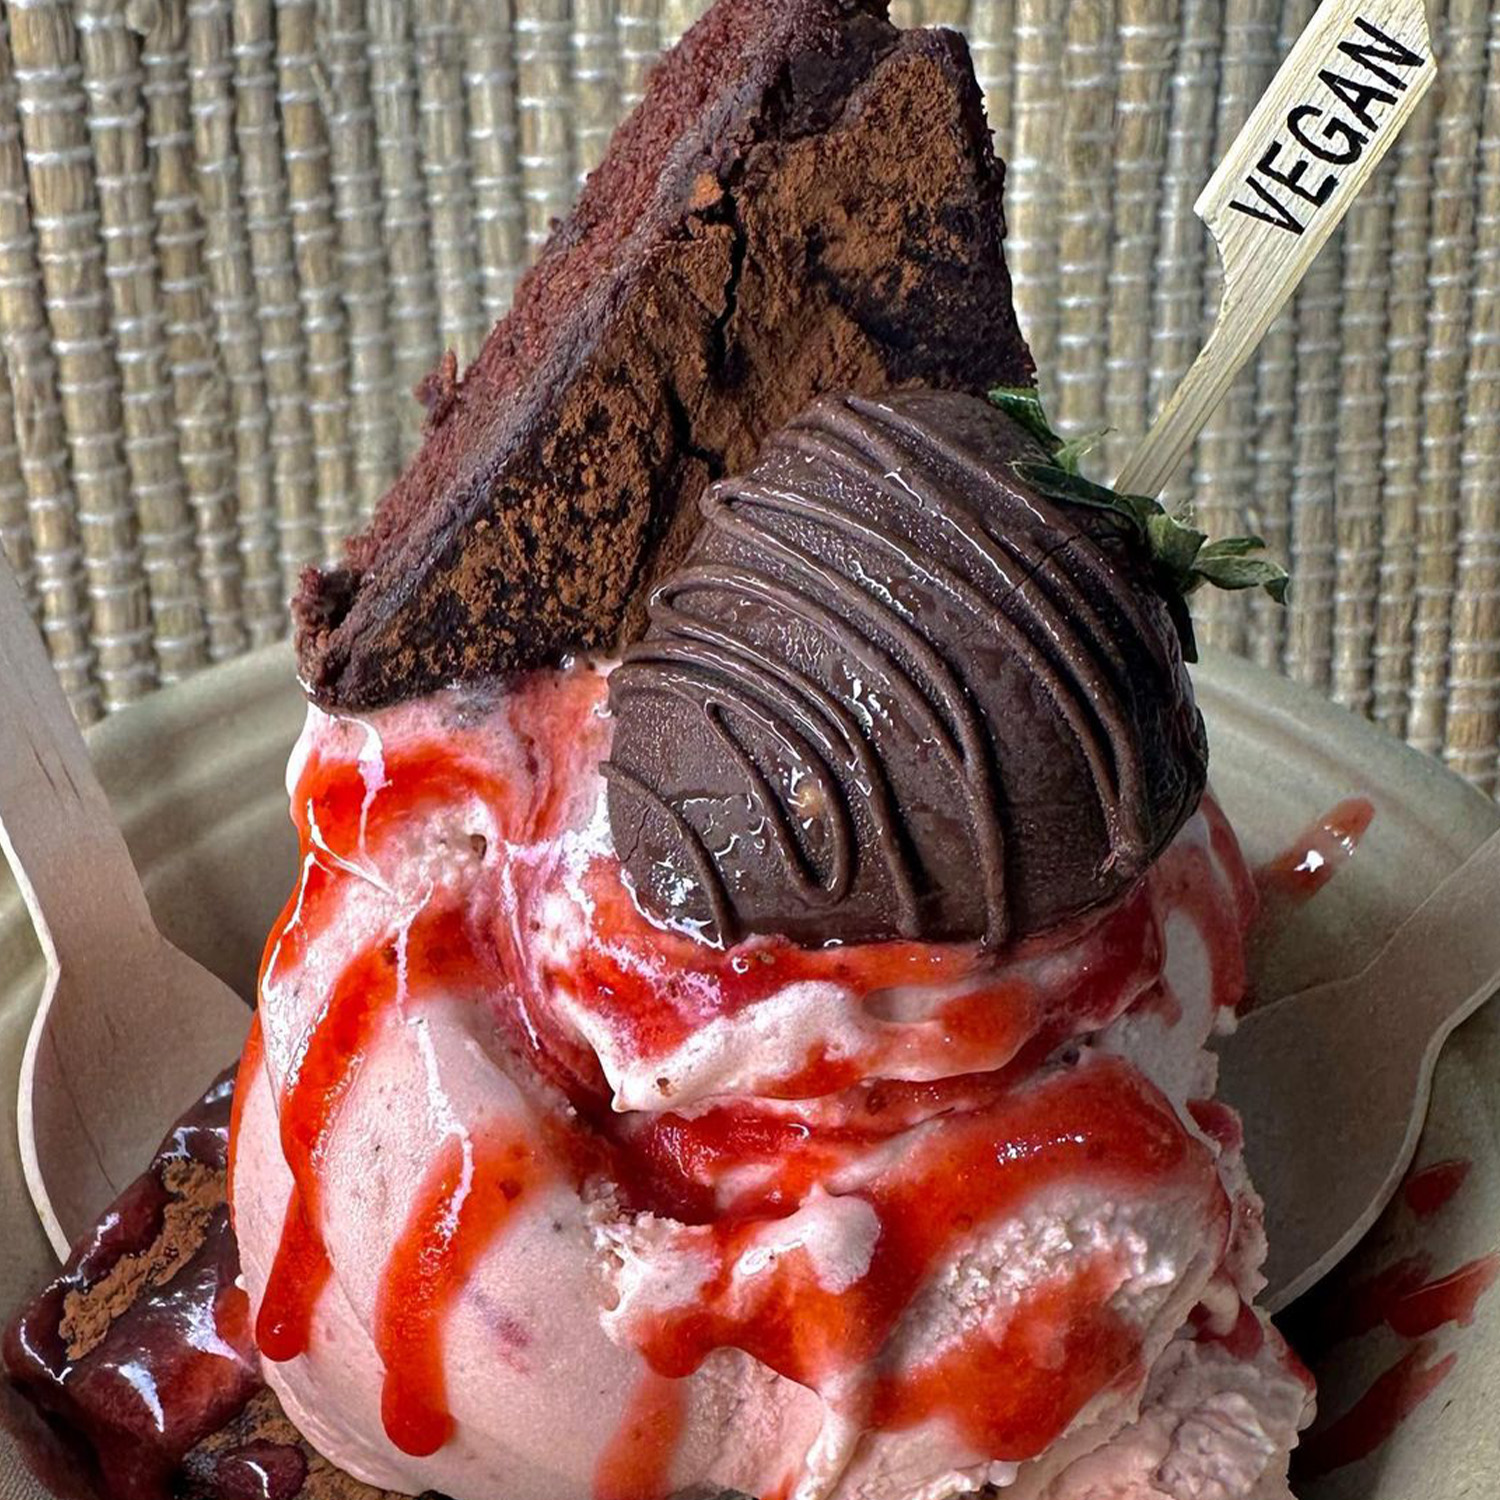 Vegan strawberry ice cream with chocolate covered strawberry and brownie